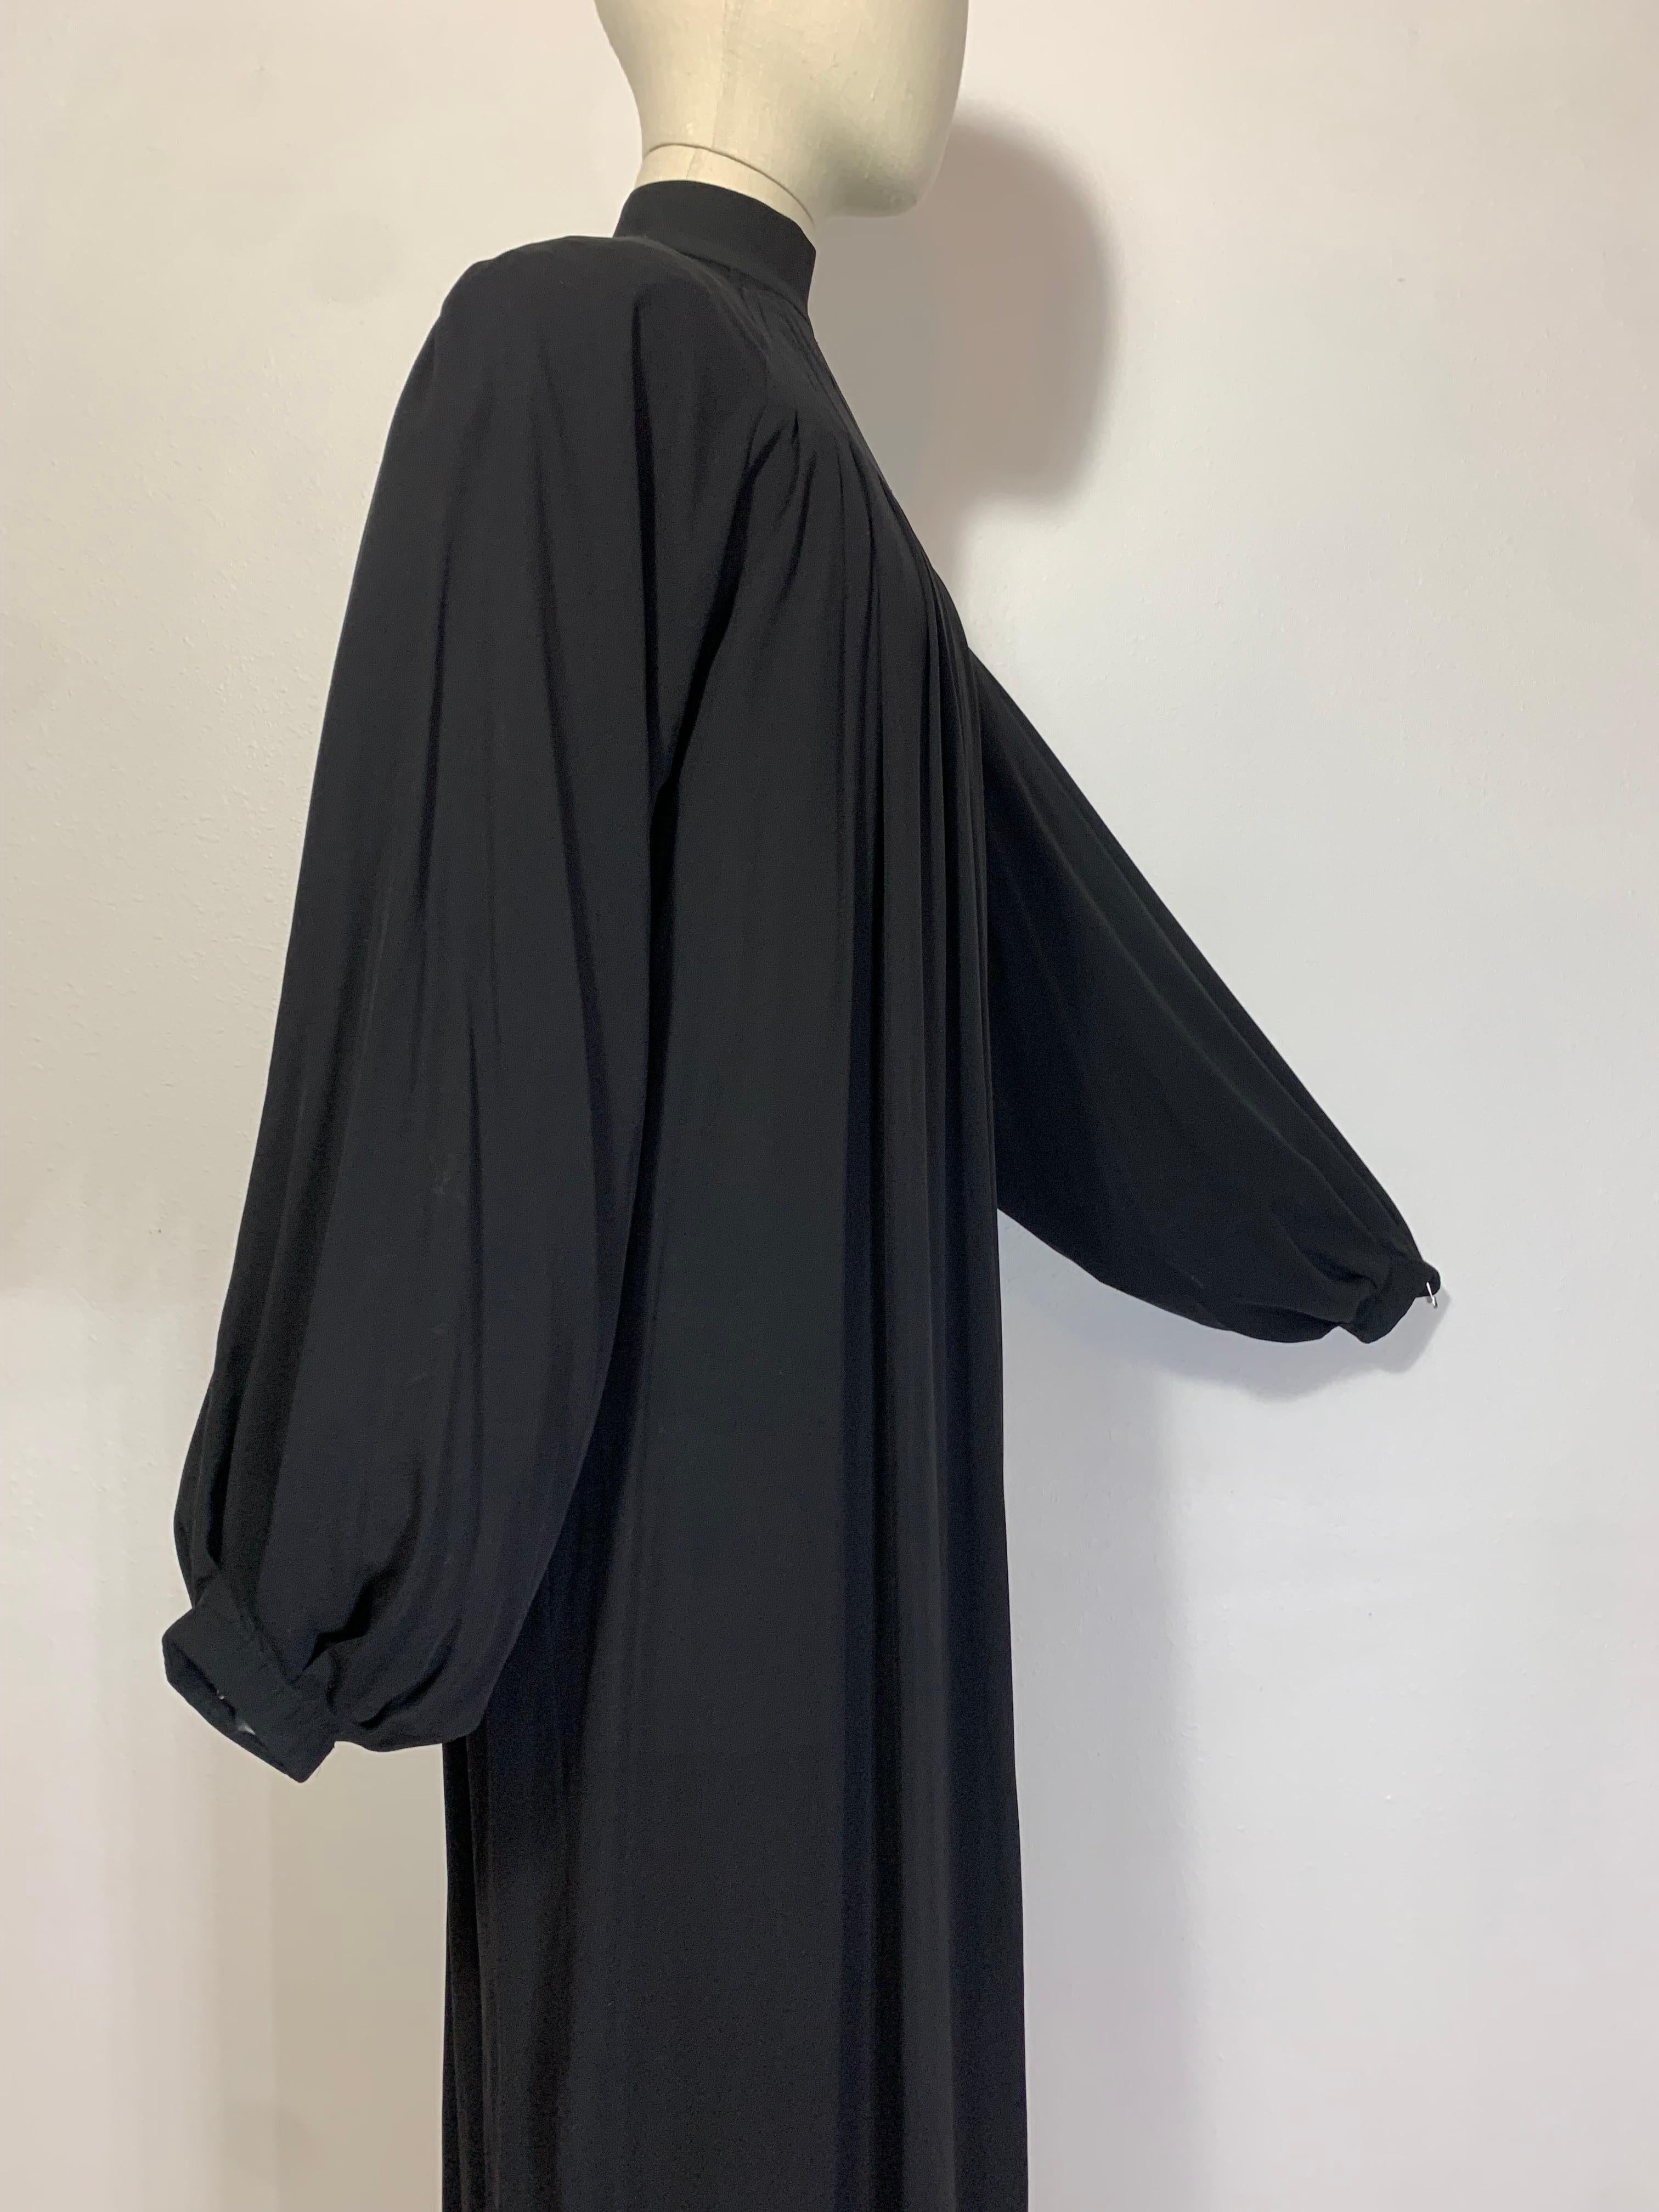 Andrew Gn Black Silk Crepe Monastic-Styled Maxi Dress w Full Pleats & High Neck  For Sale 6